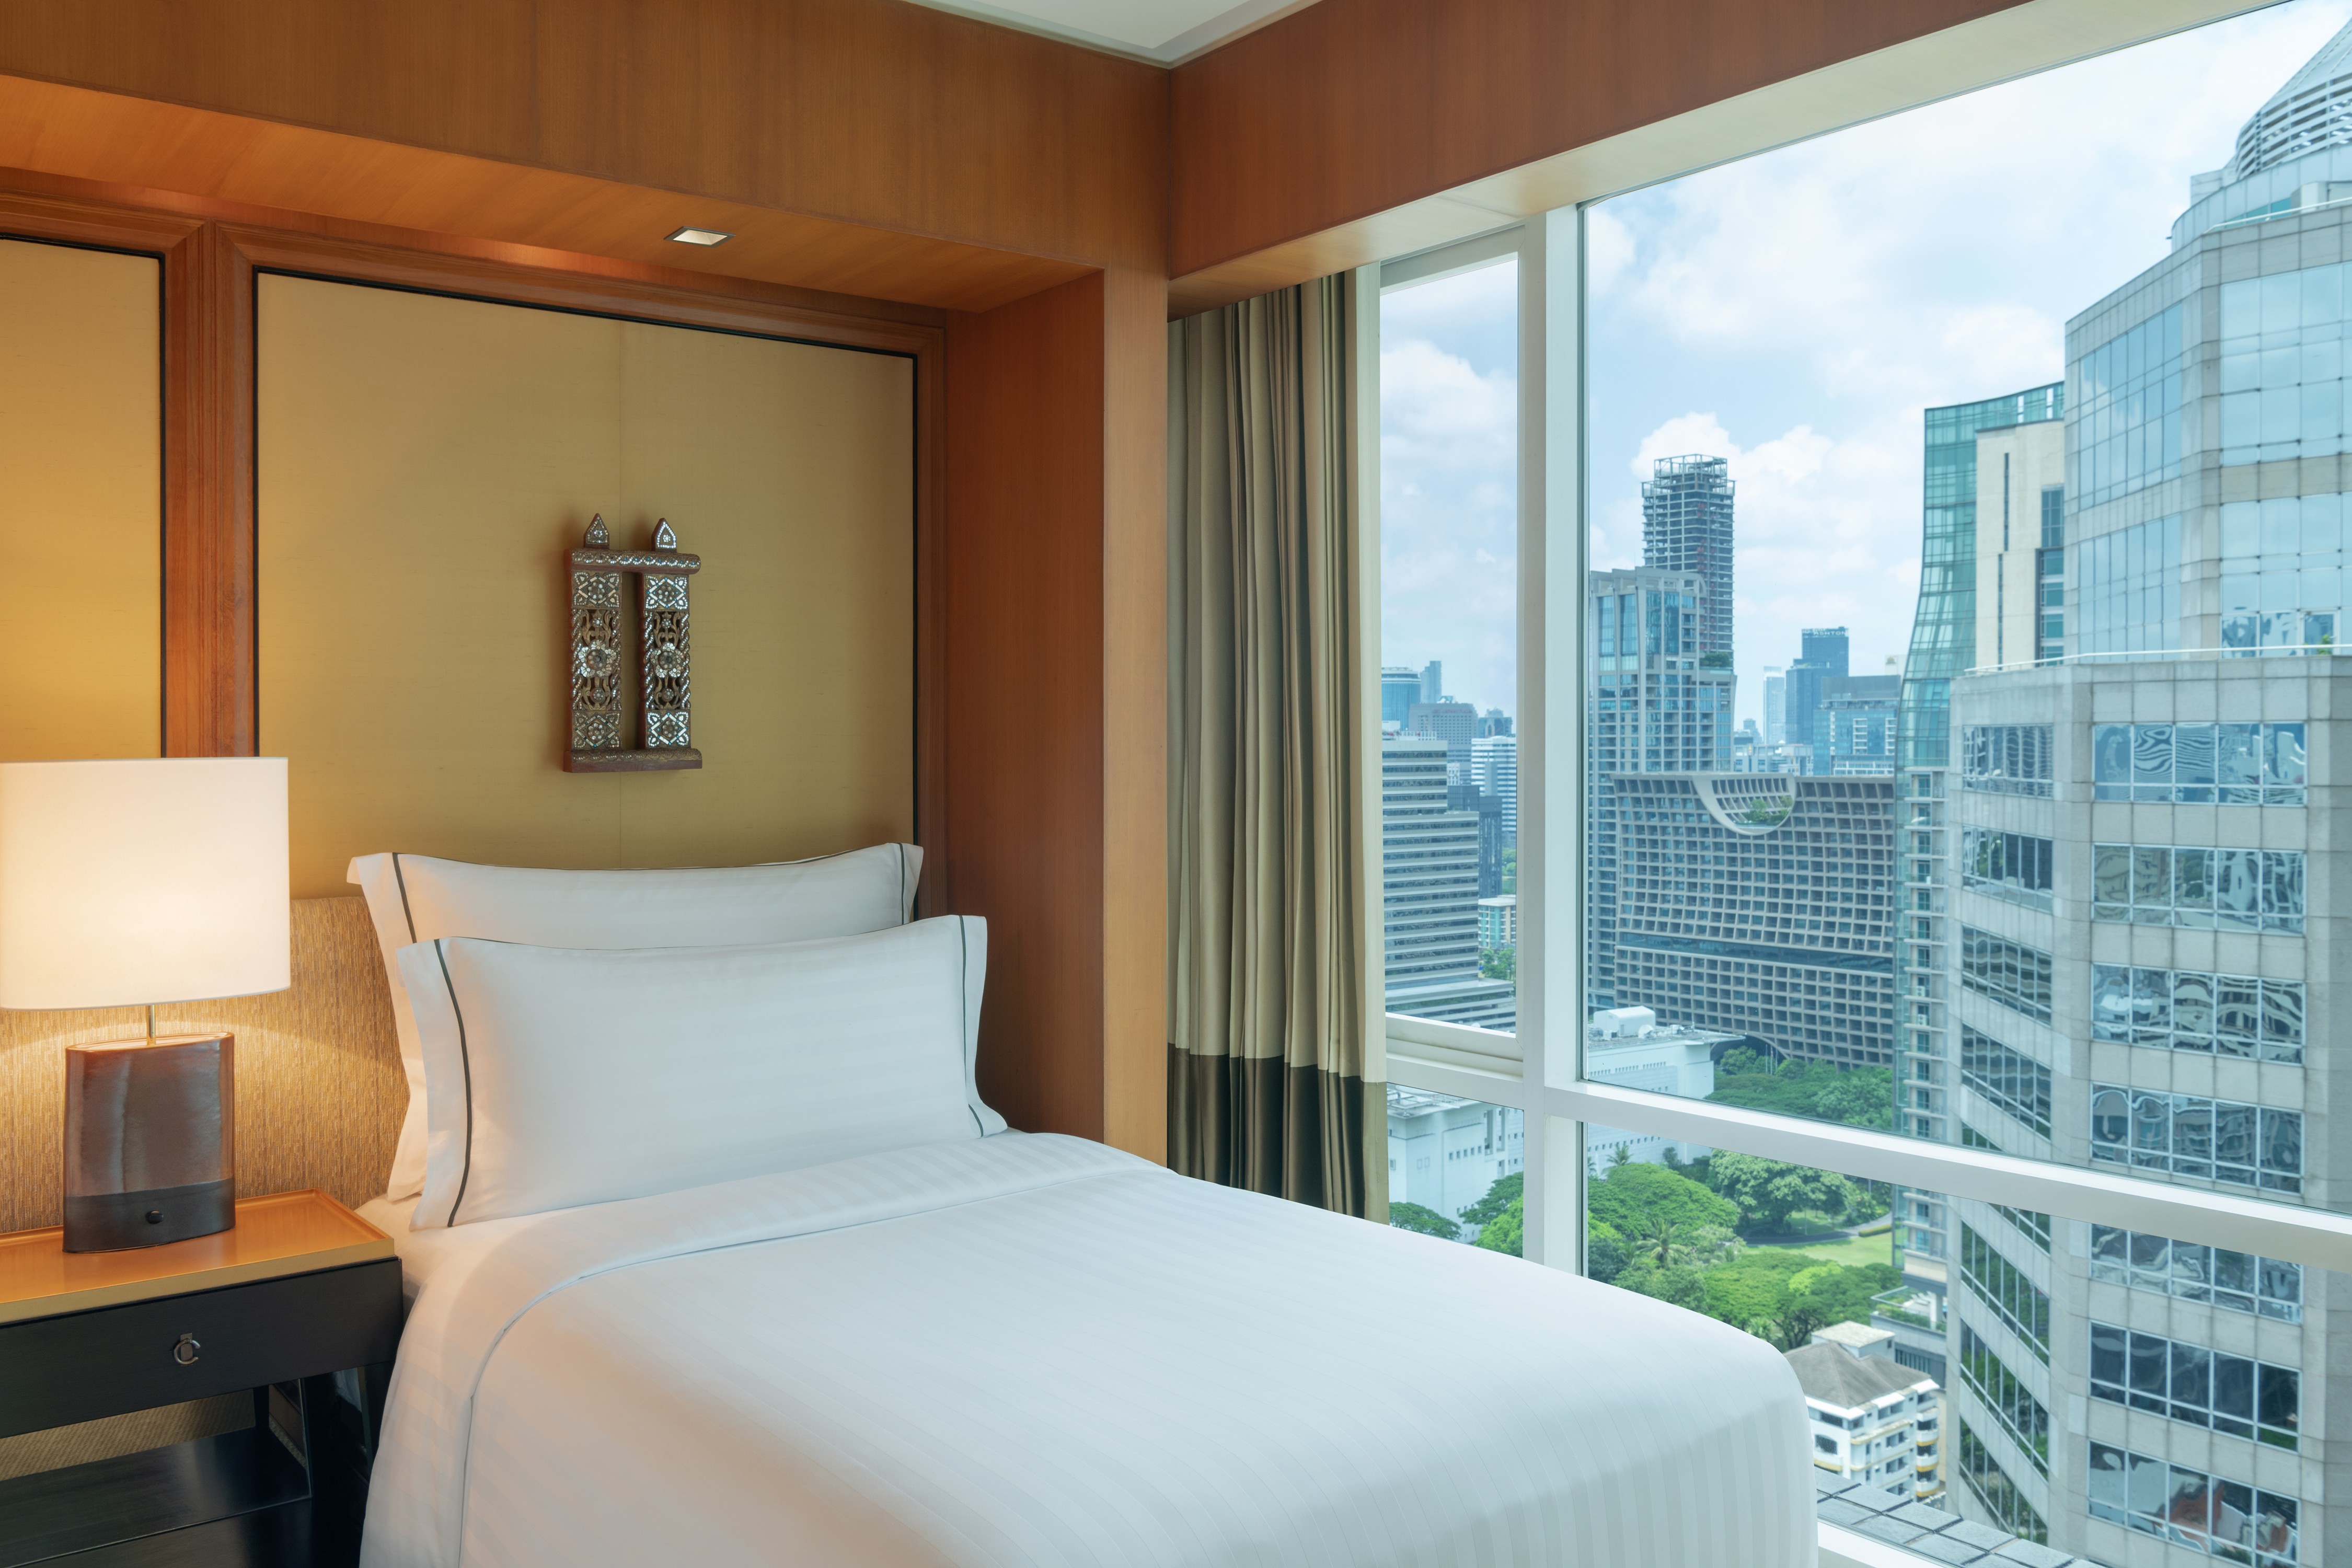 twin bed and window with view of city